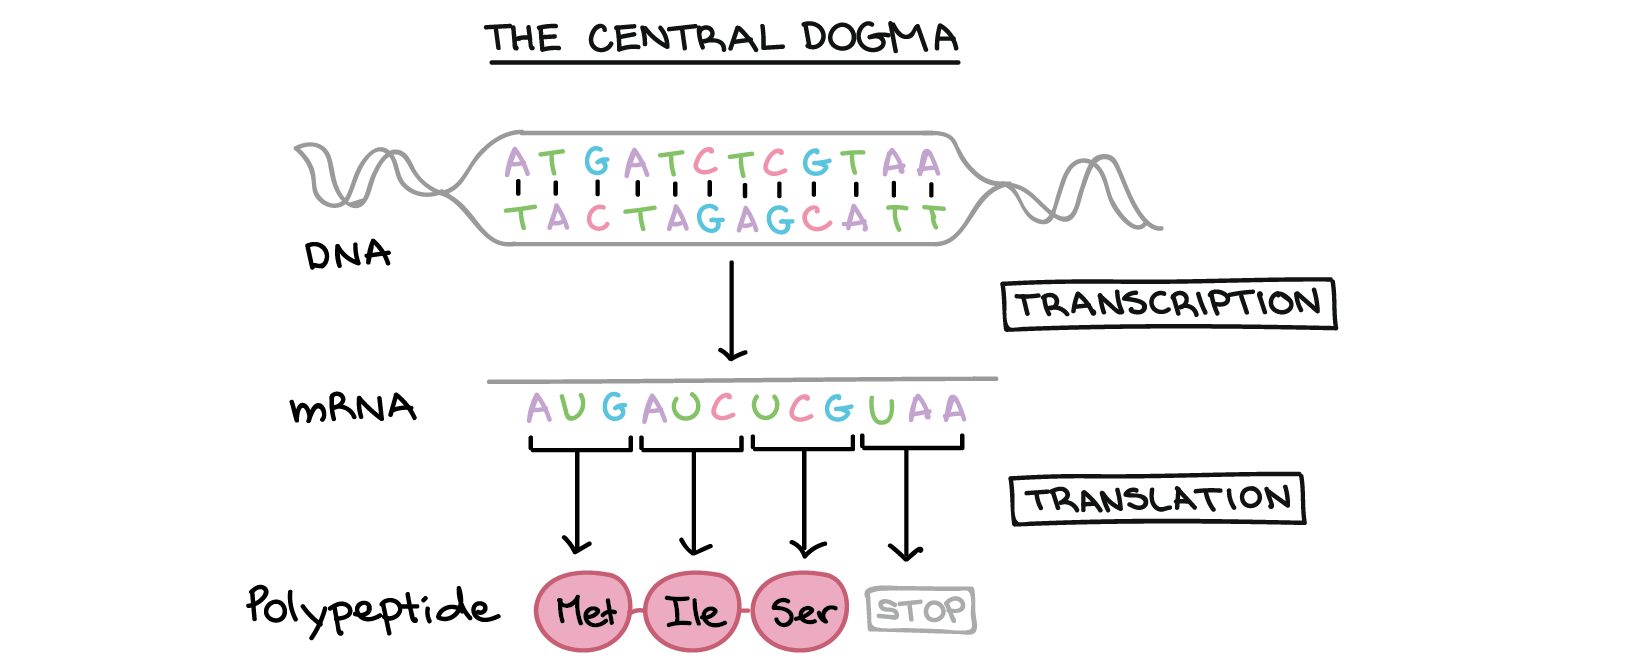 Central dogma of biology. Image shows a sequence of steps from the ACGT strings to ACGU strings to proteins